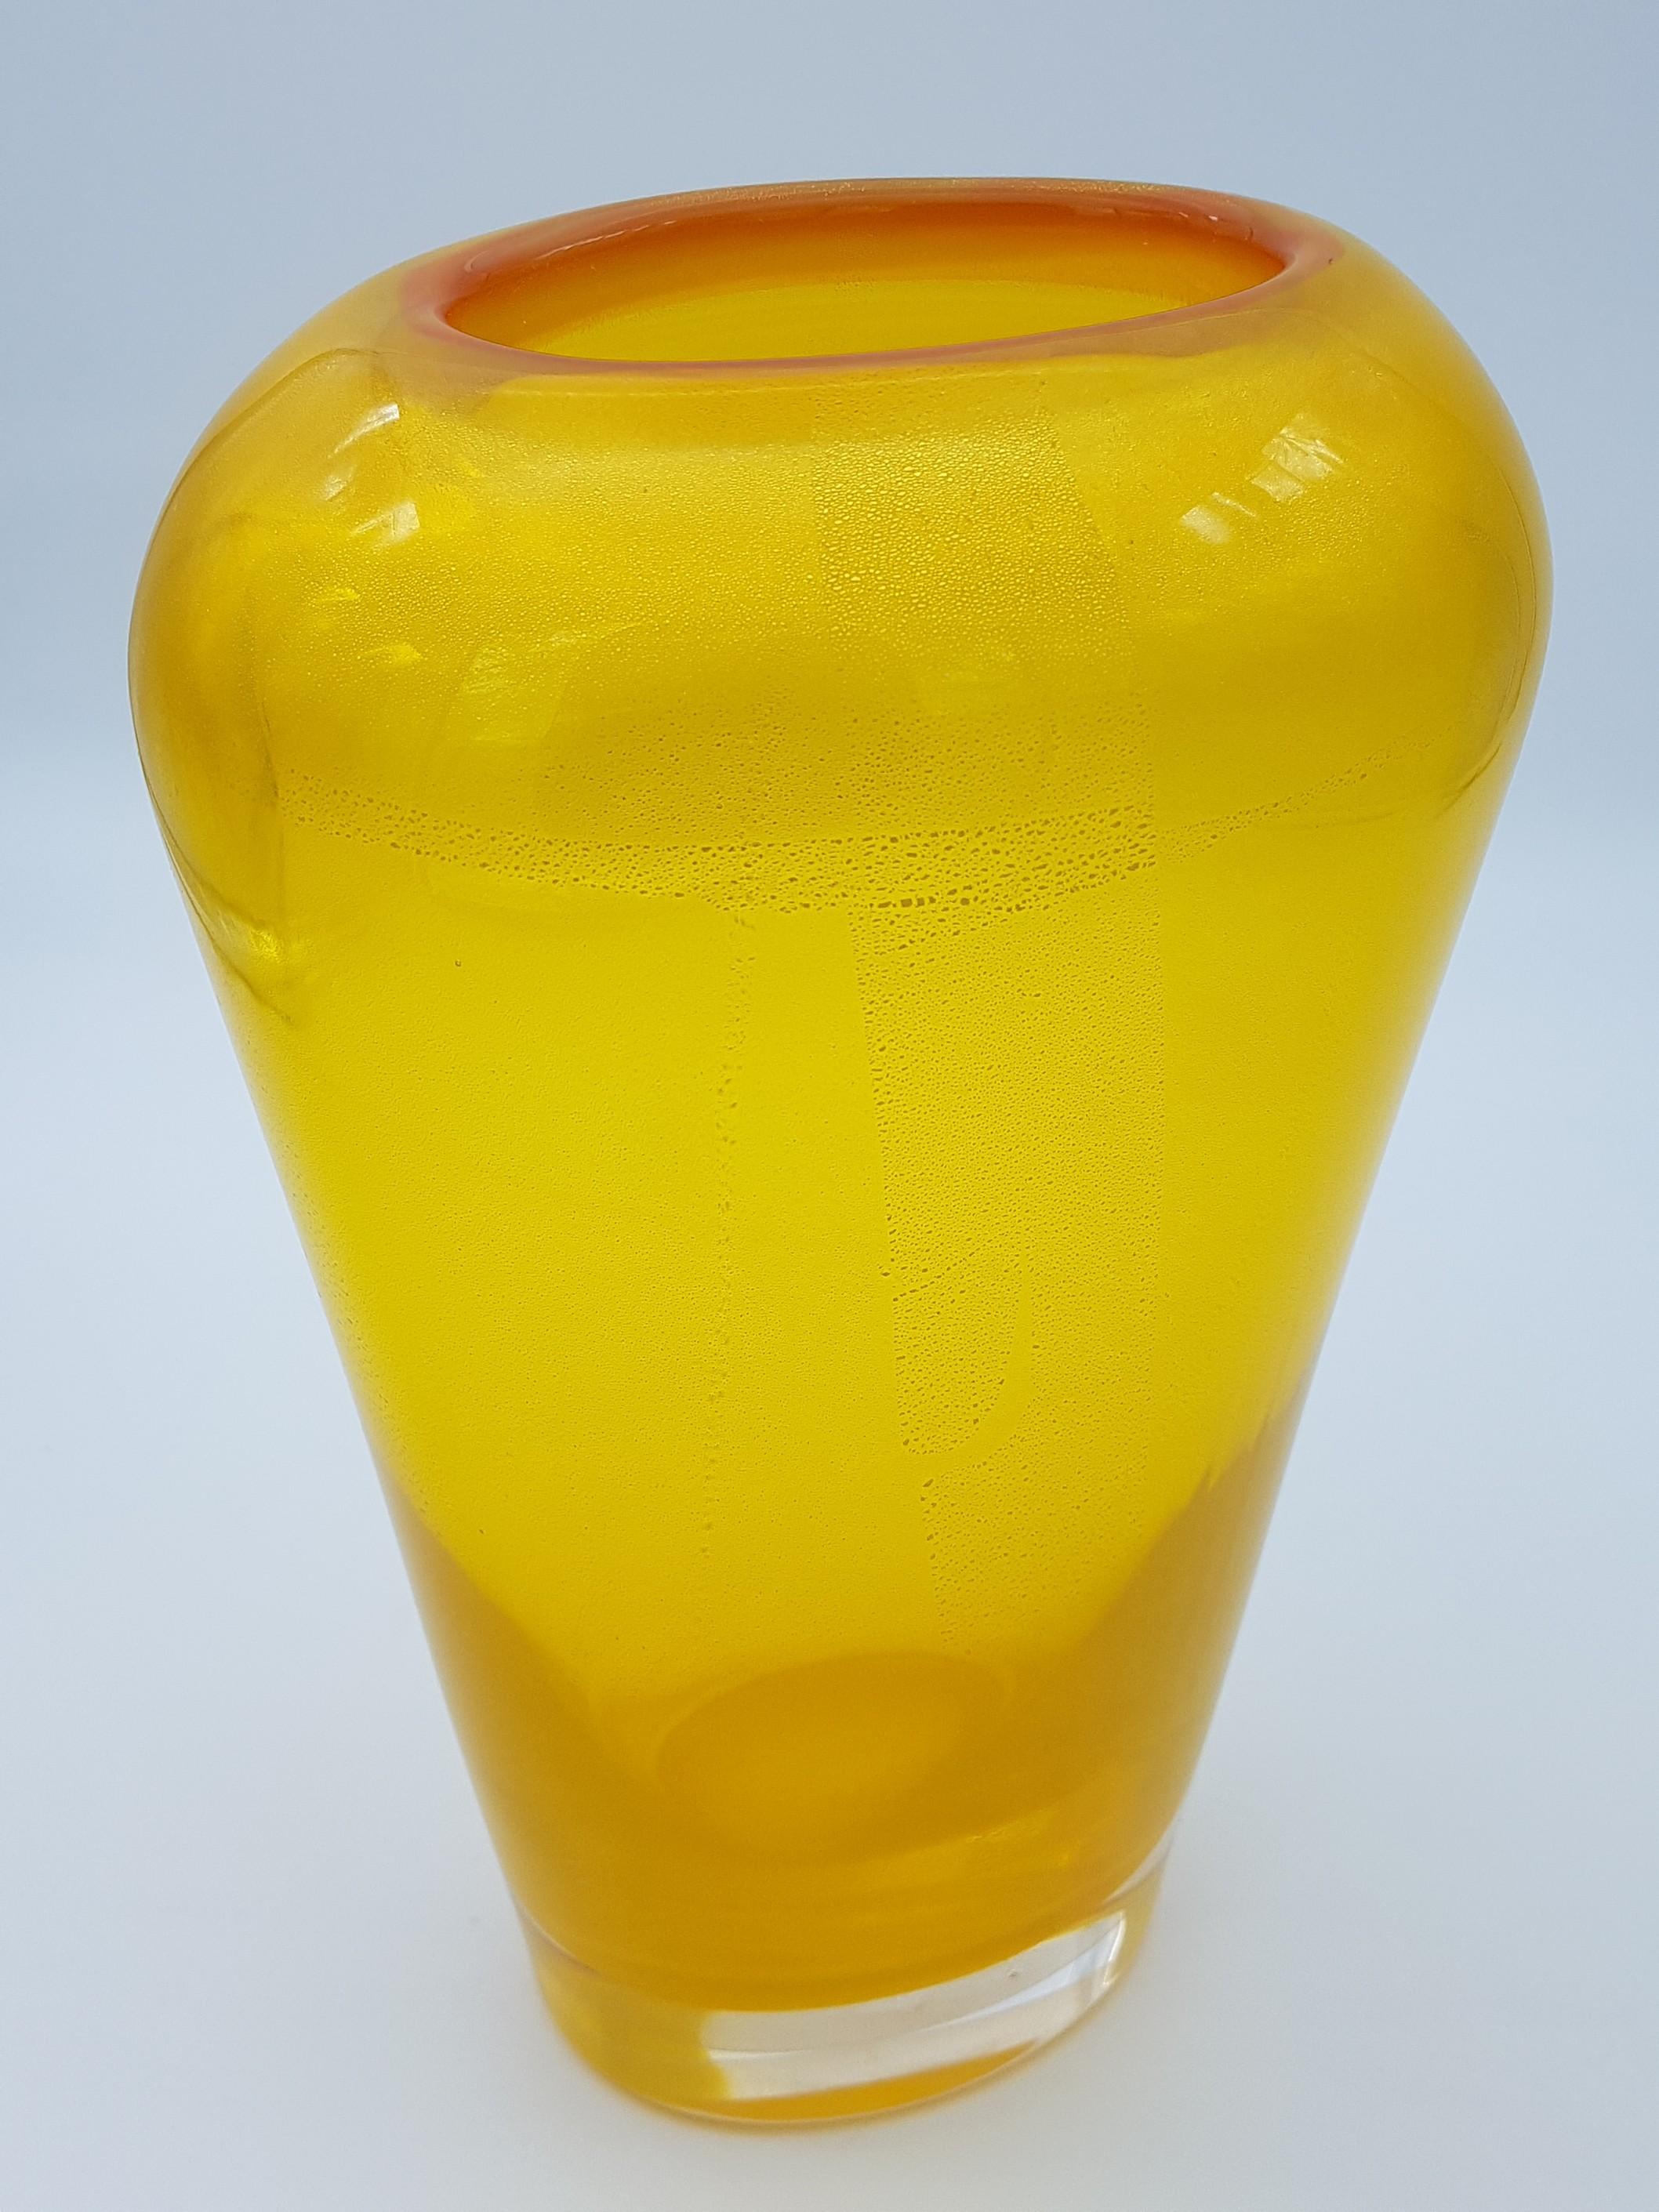 Modern Murano Glass Vase Gold Yellow Color by Cenedese, Late 1990s For Sale 7